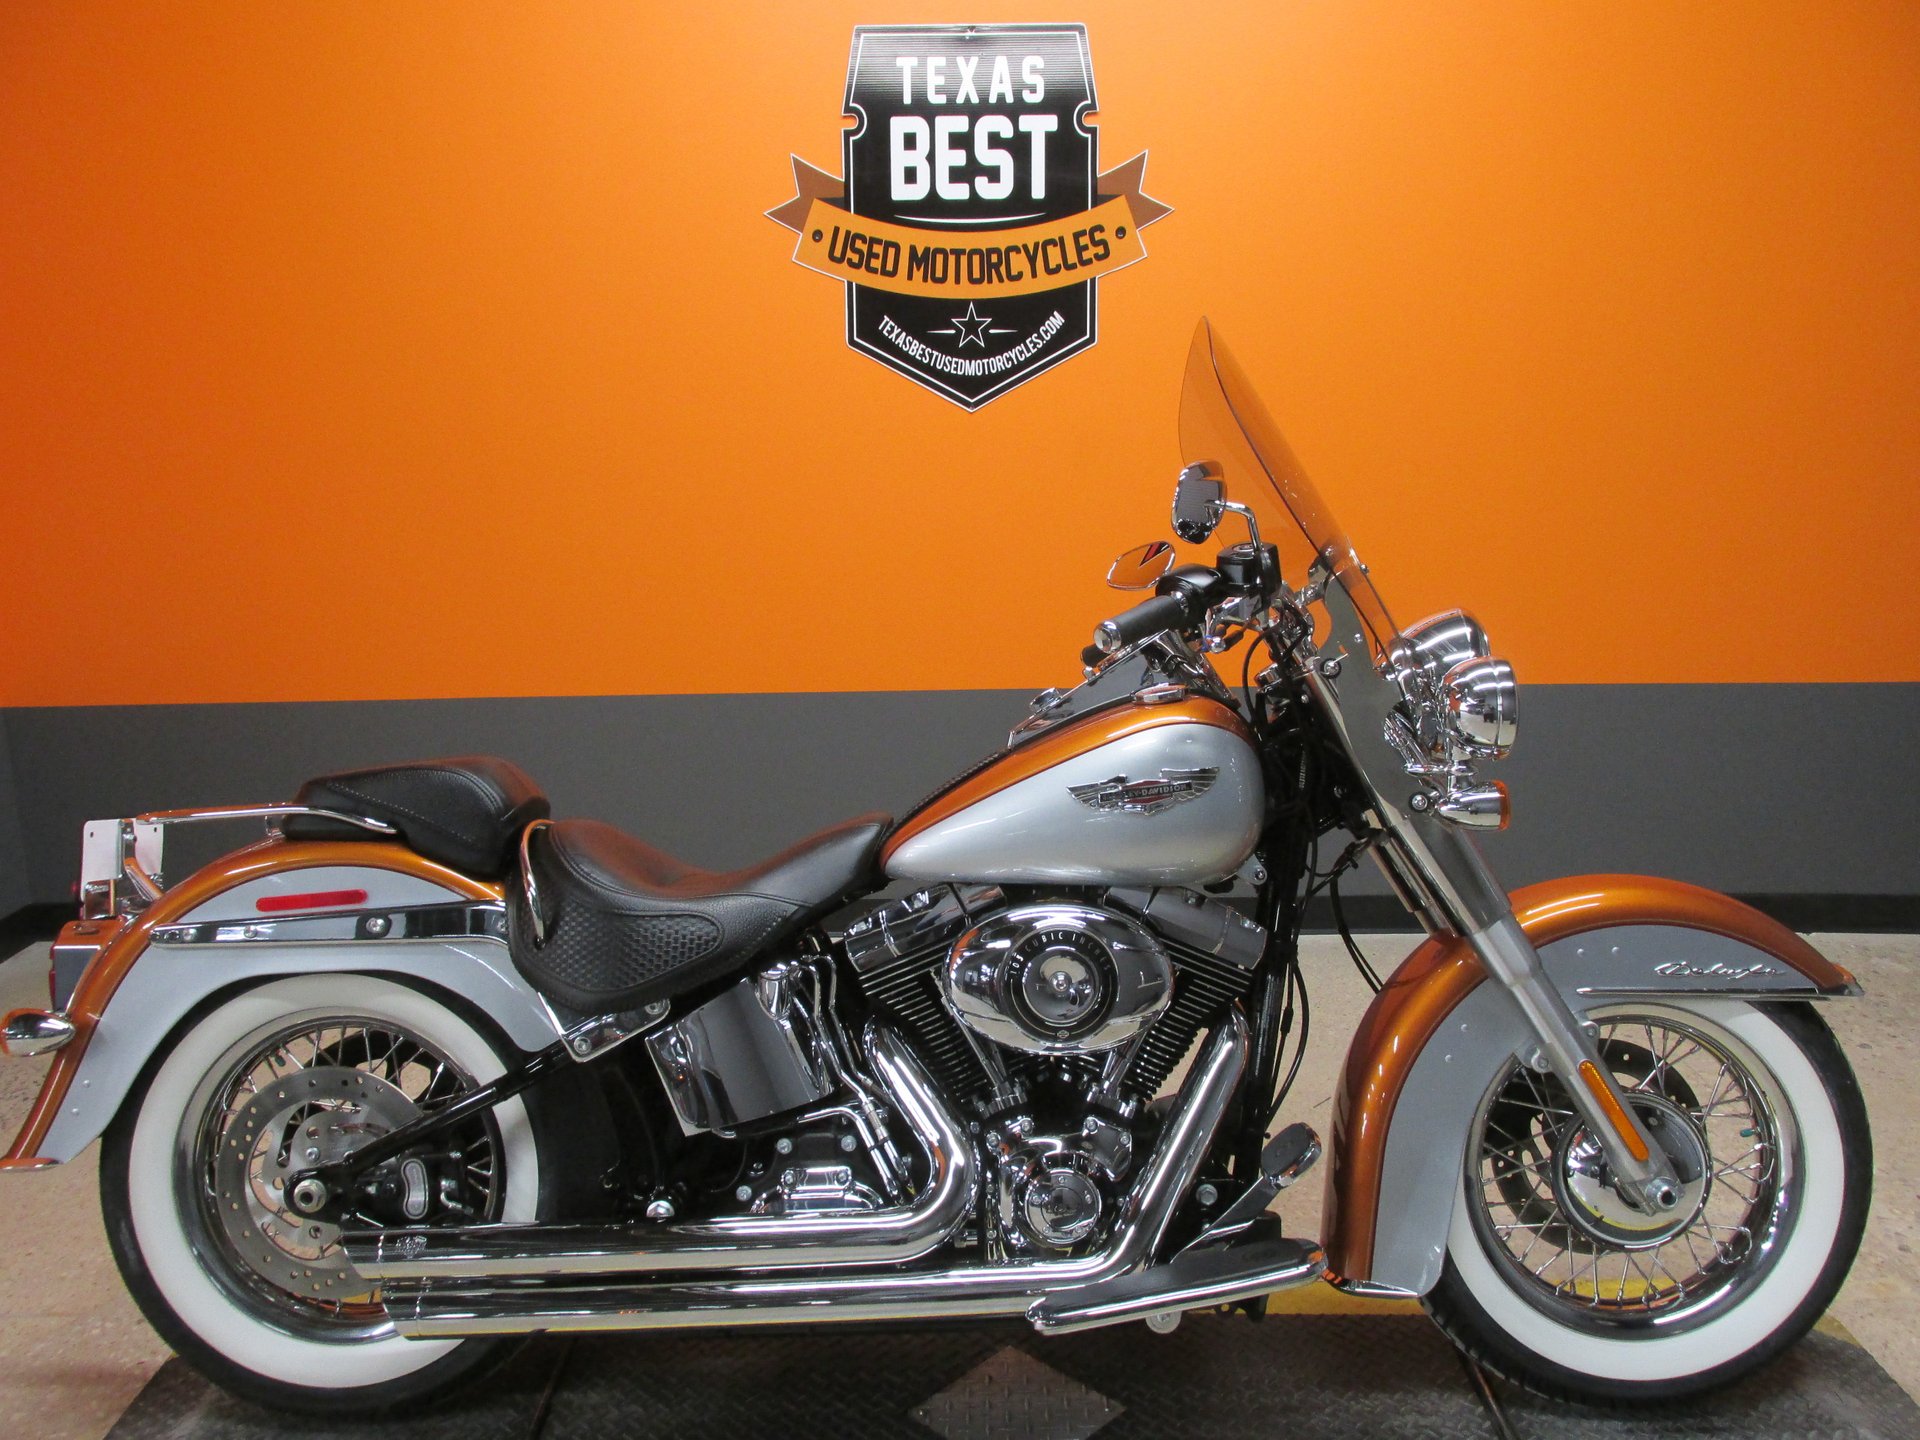 2014 Harley Davidson Softail Deluxe American Motorcycle Trading Company Used Harley Davidson Motorcycles